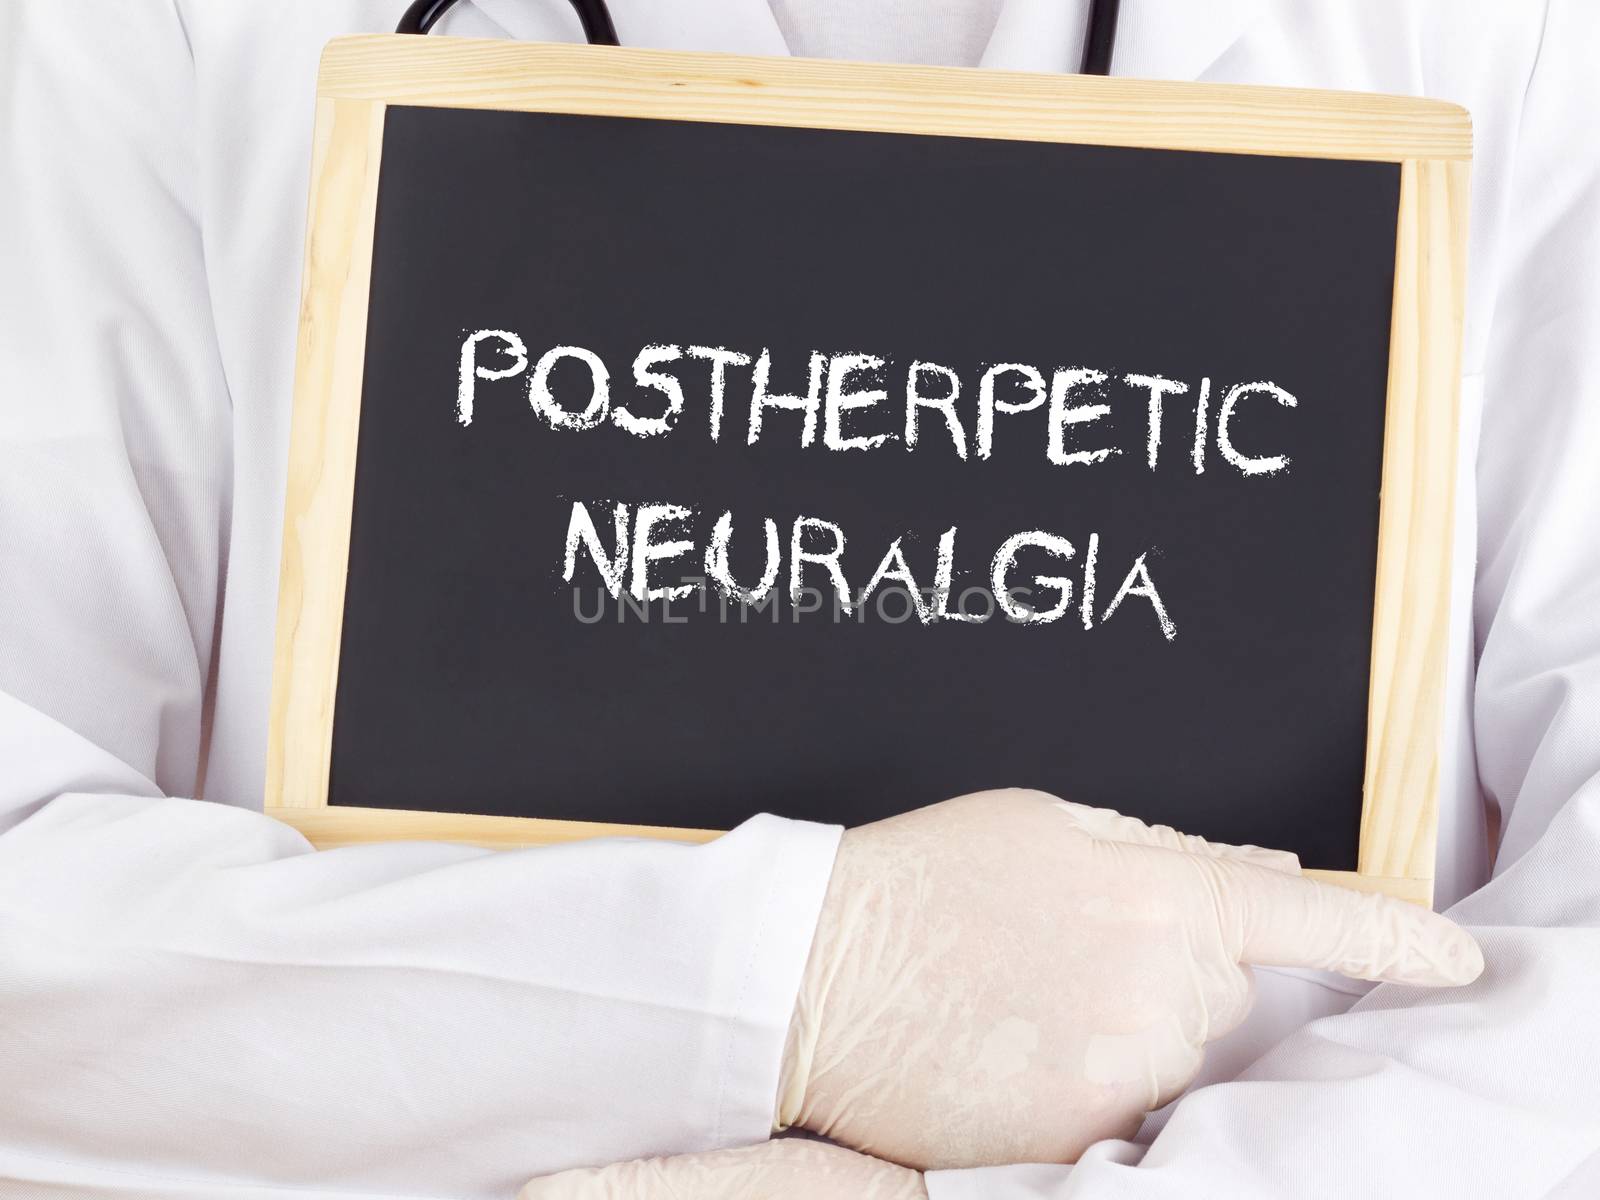 Doctor shows information: postherpetic neuralgia by gwolters